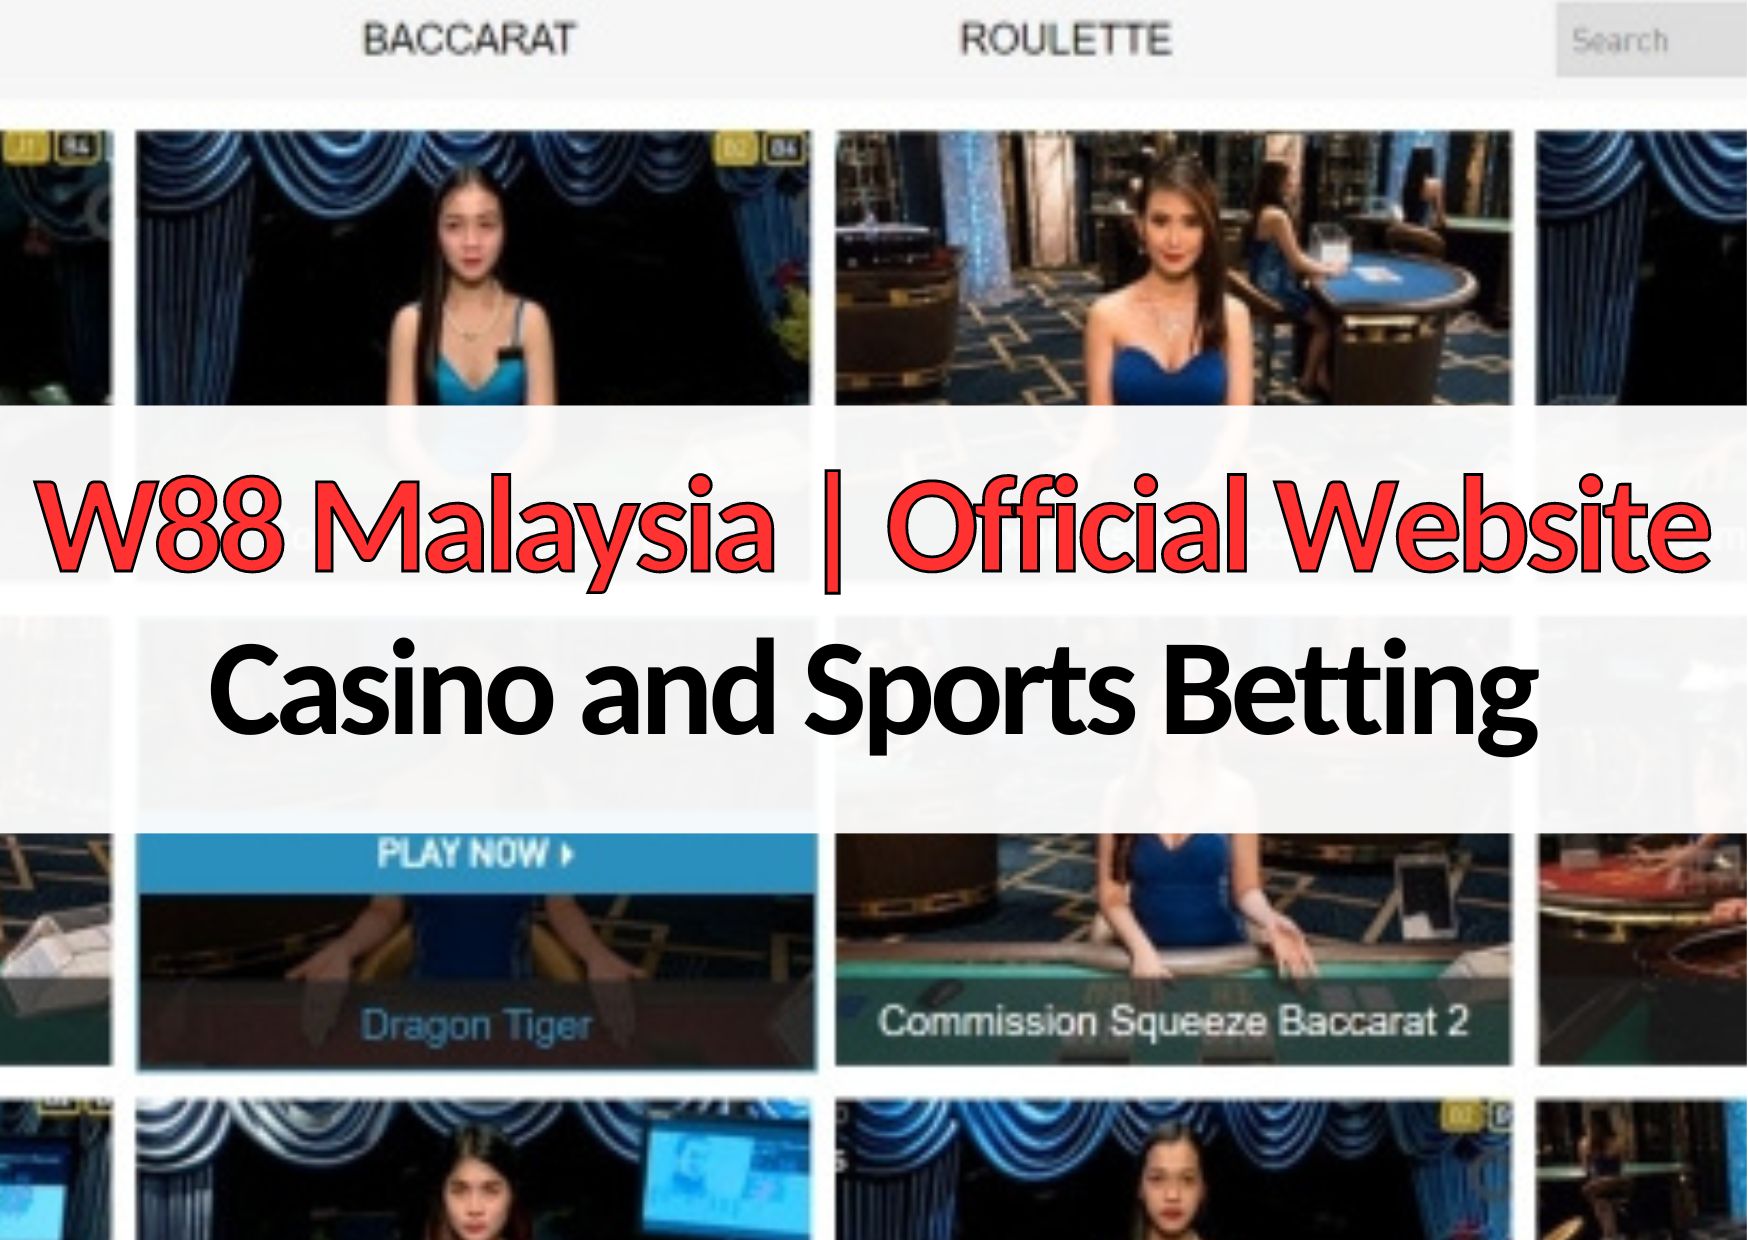 w88 malaysia official website casino and sports betting